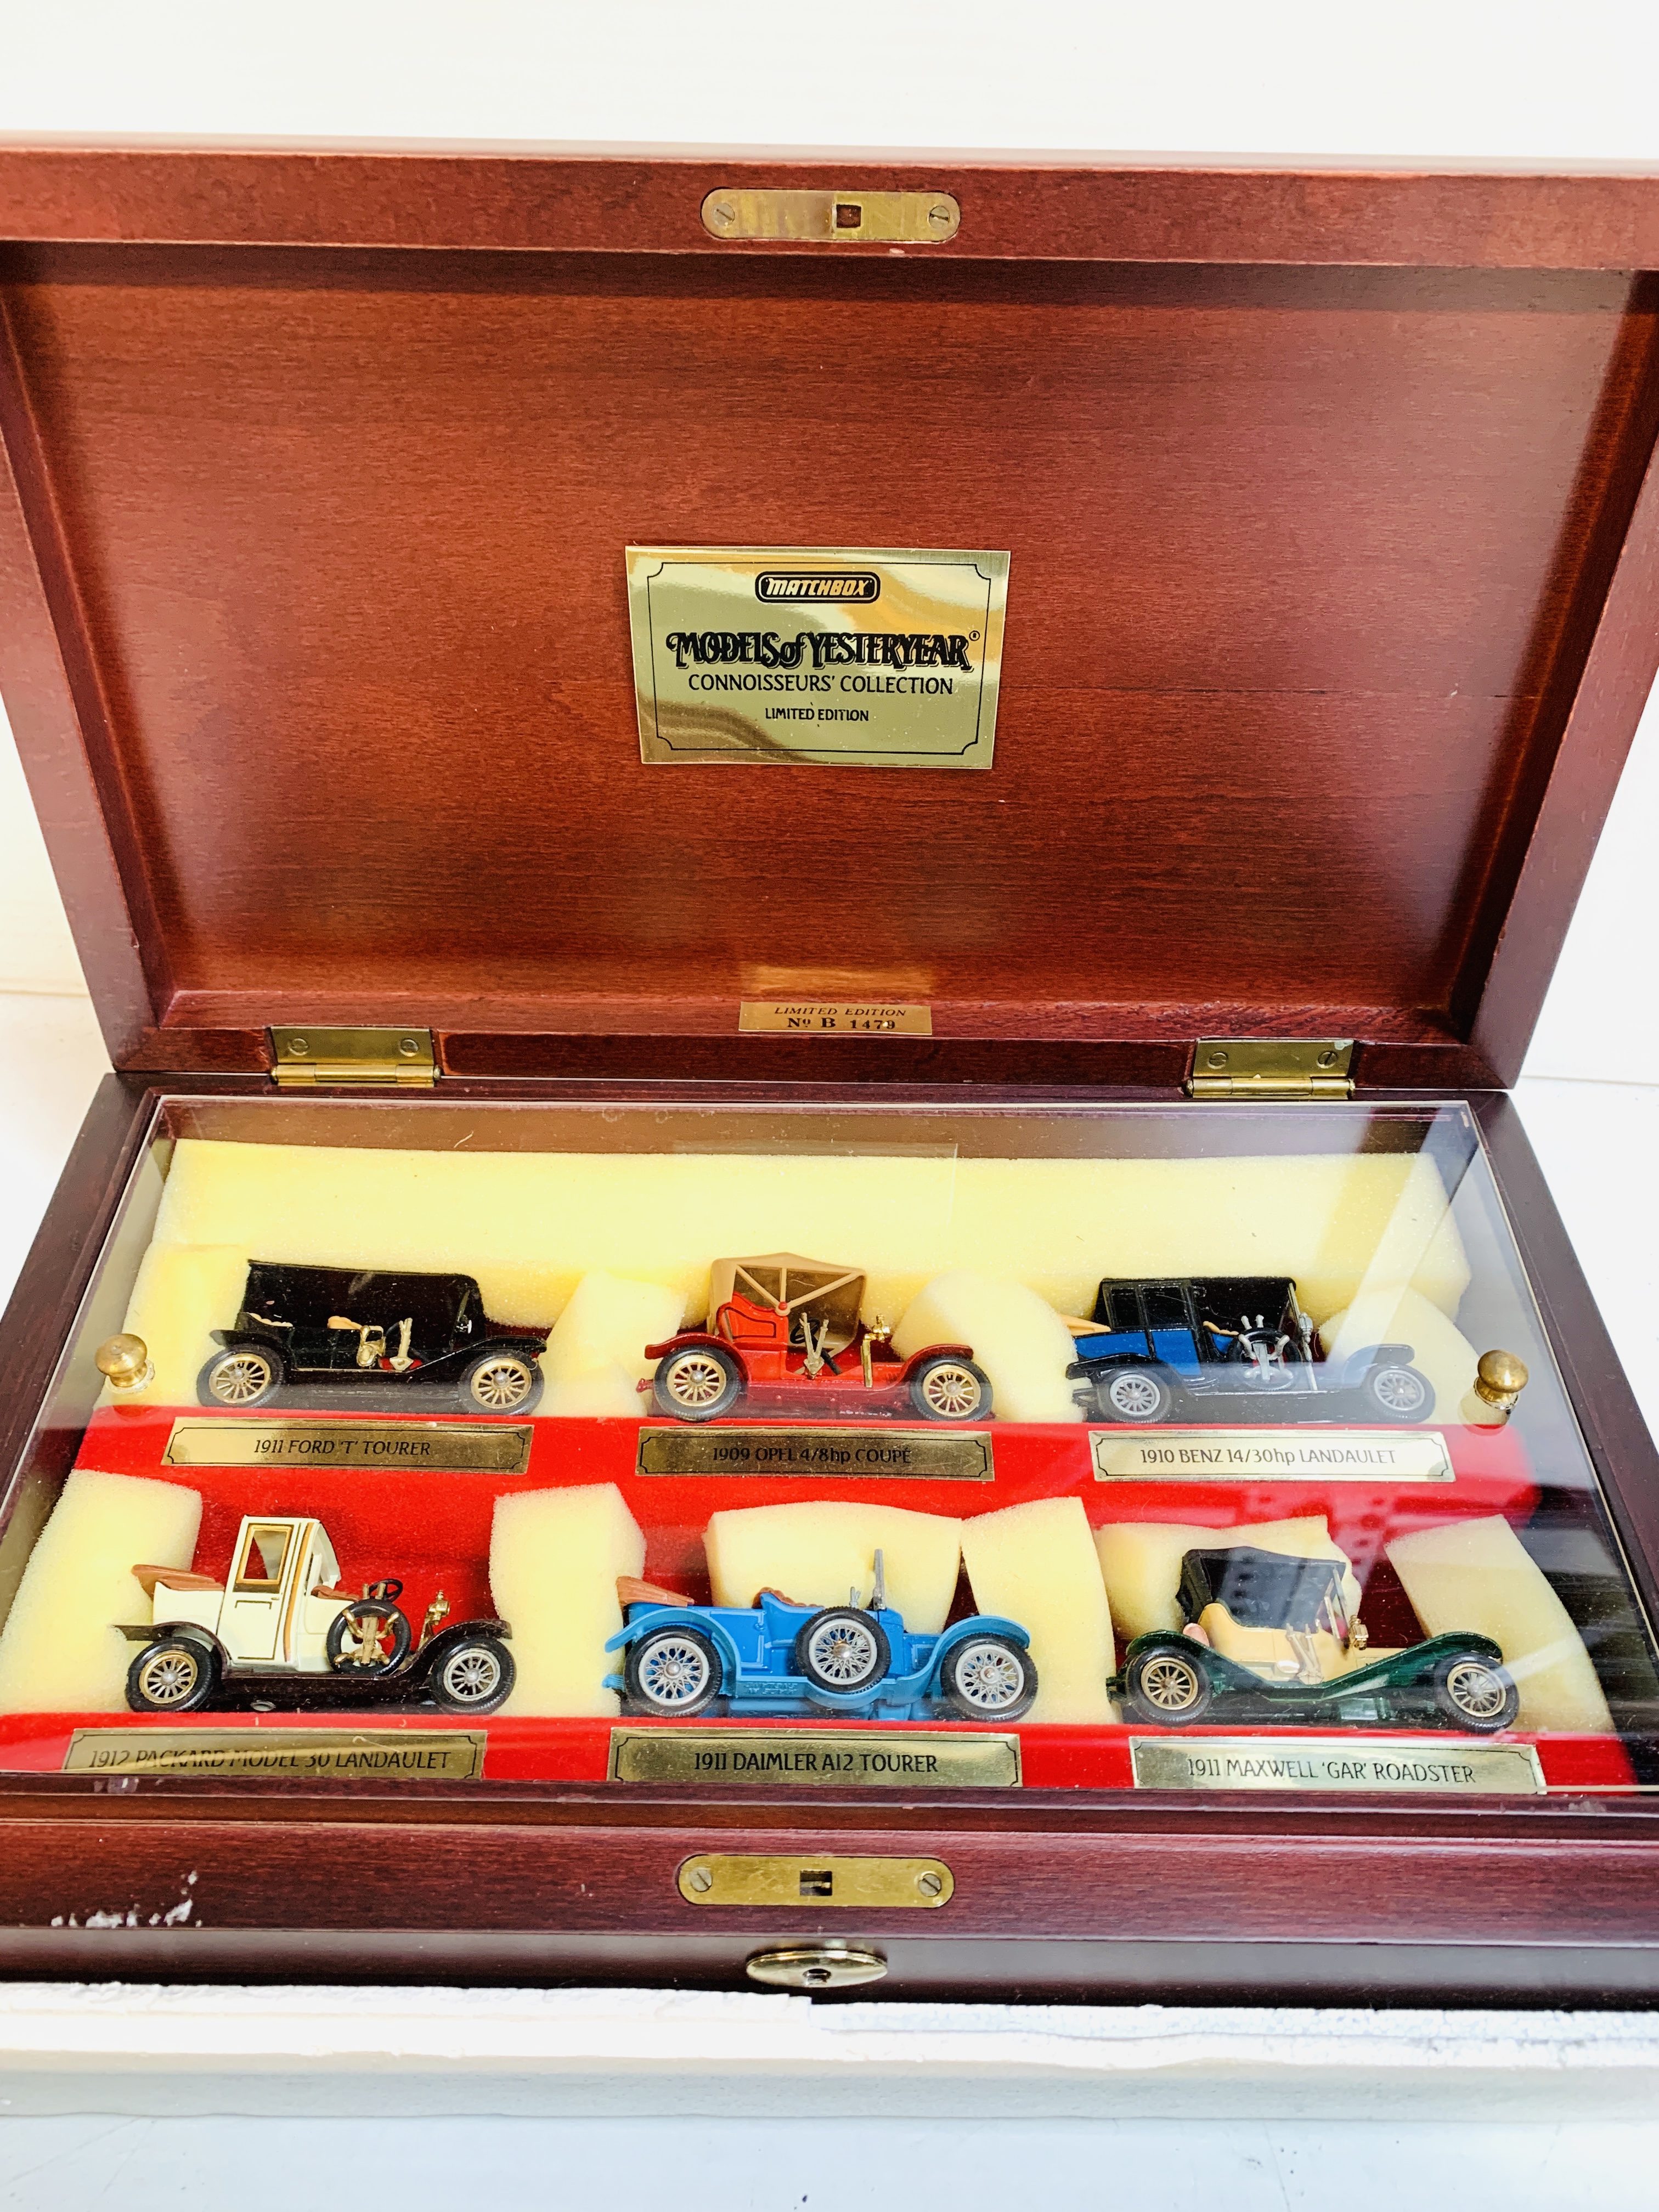 Matchbox Models of Yesteryear Connoisseurs' Collection - Image 2 of 5